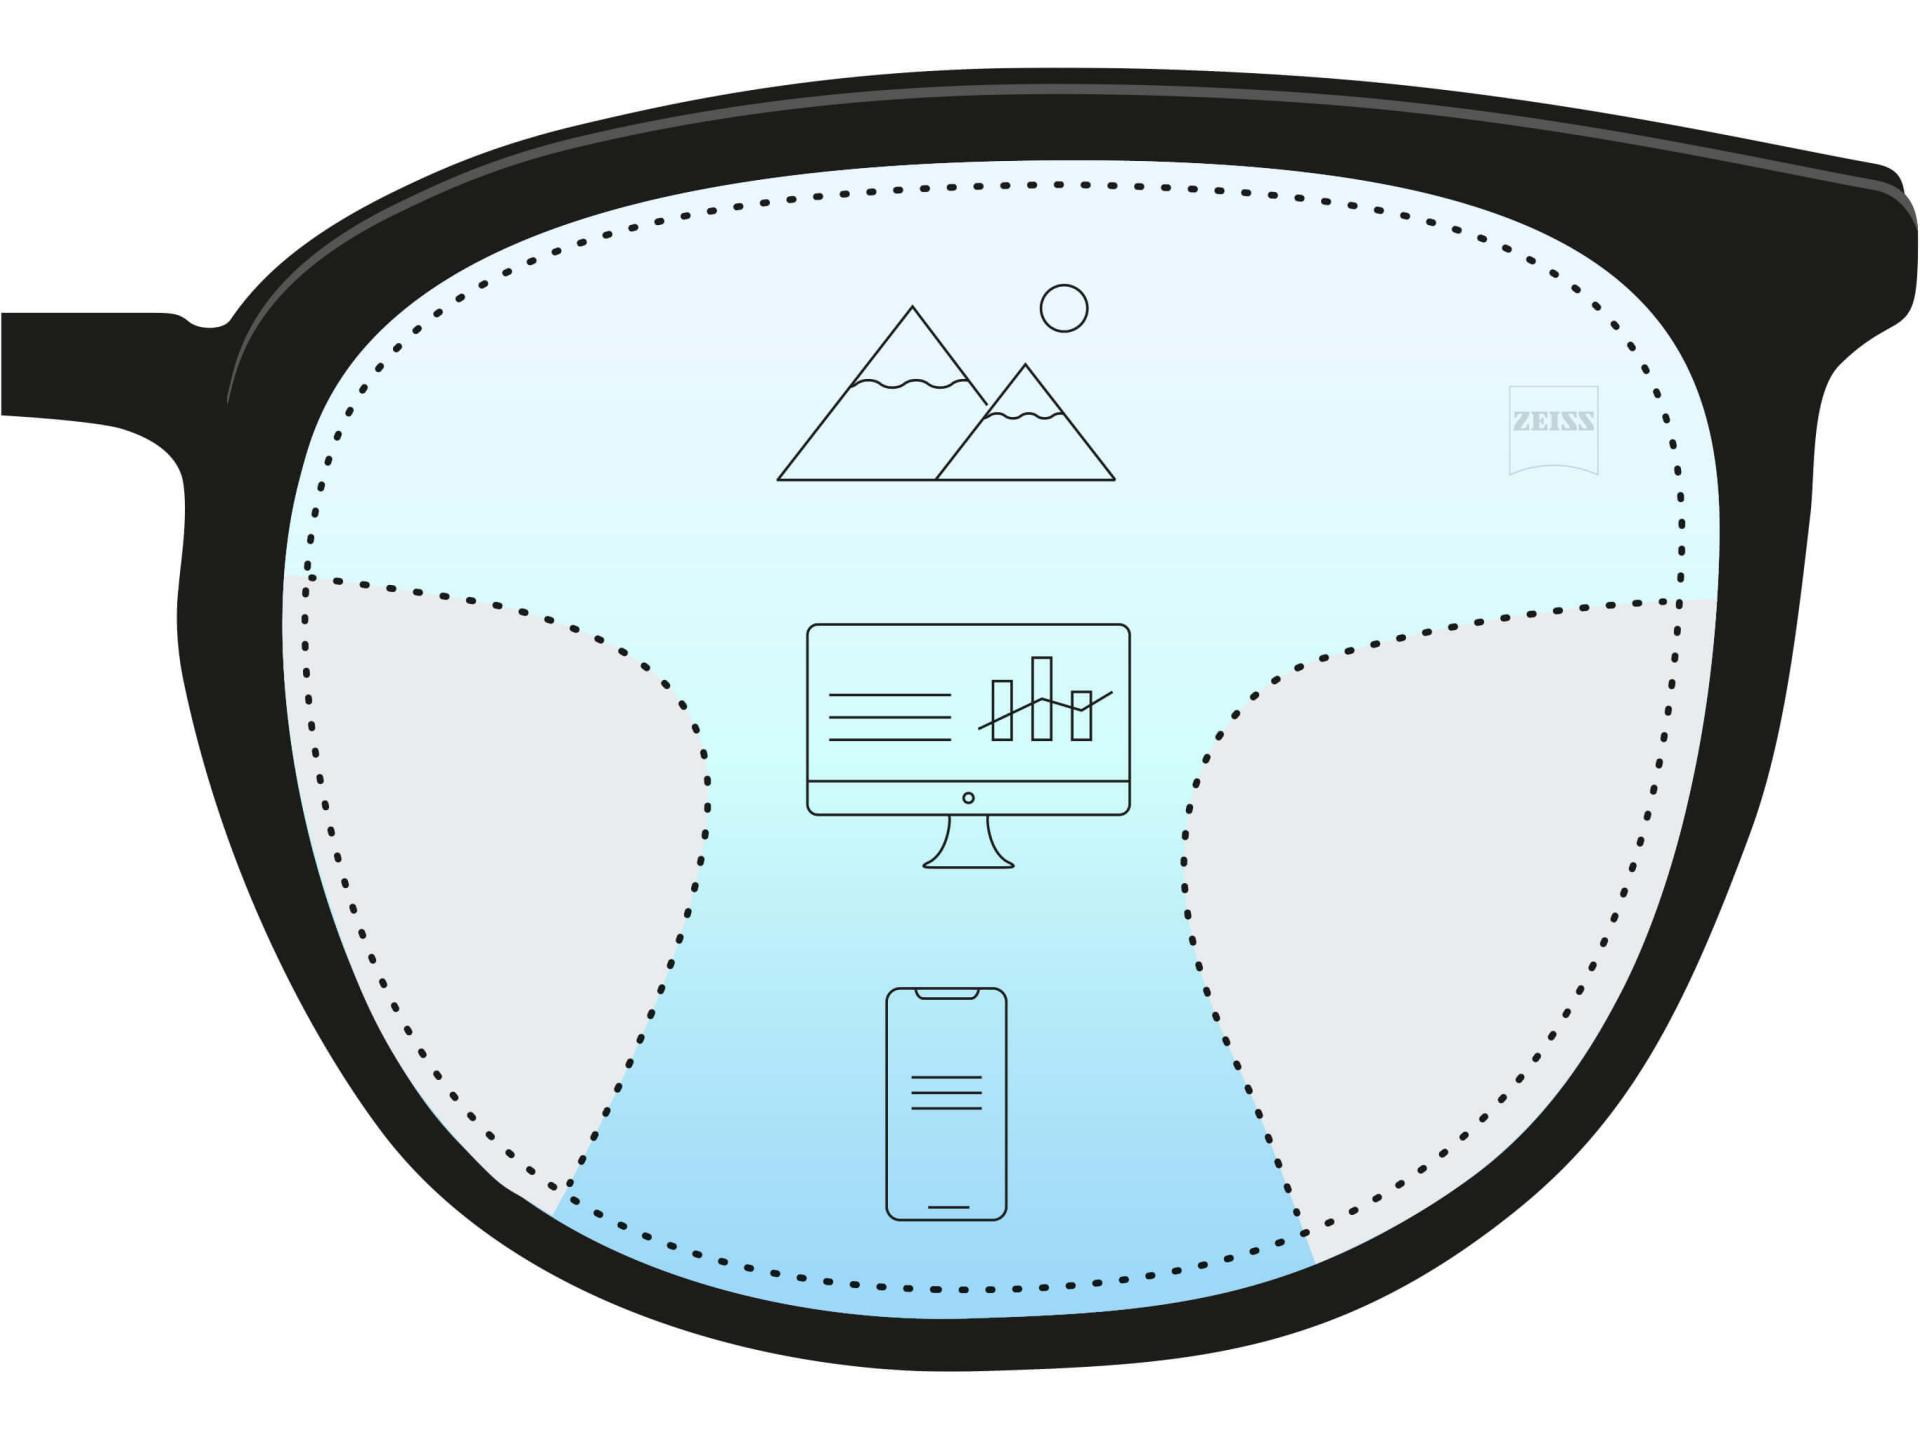 An illustration of a progressive lens showing three different zones. Three icons and color gradient indicate three prescriptions for different distances - near, intermediate and far.